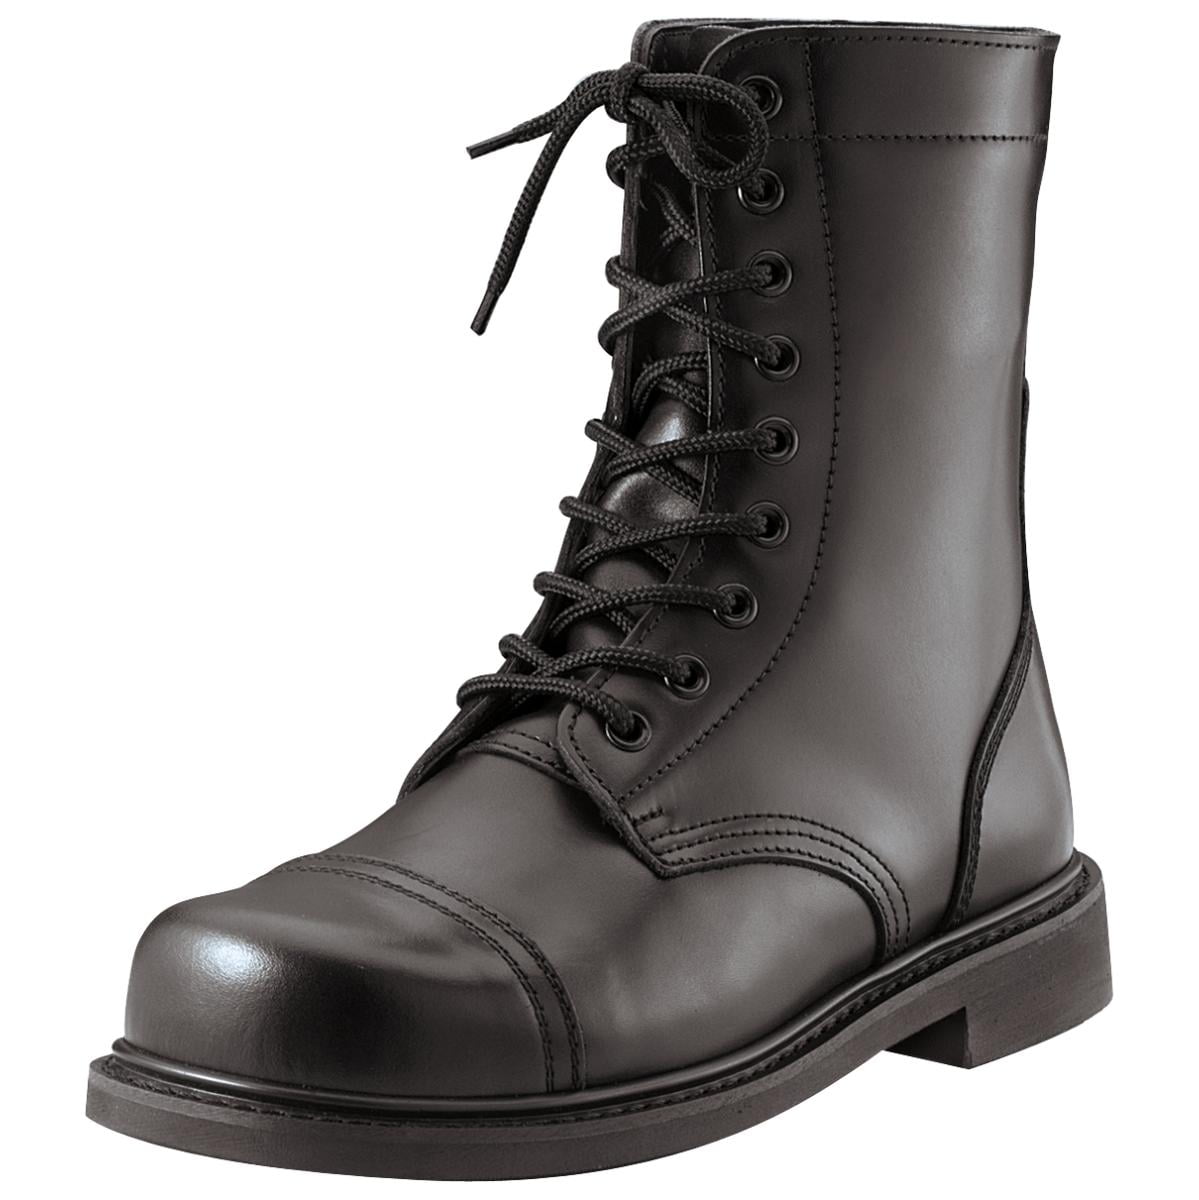 Rothco - Classic Combat Jump Style Boots with All-Leather Upper